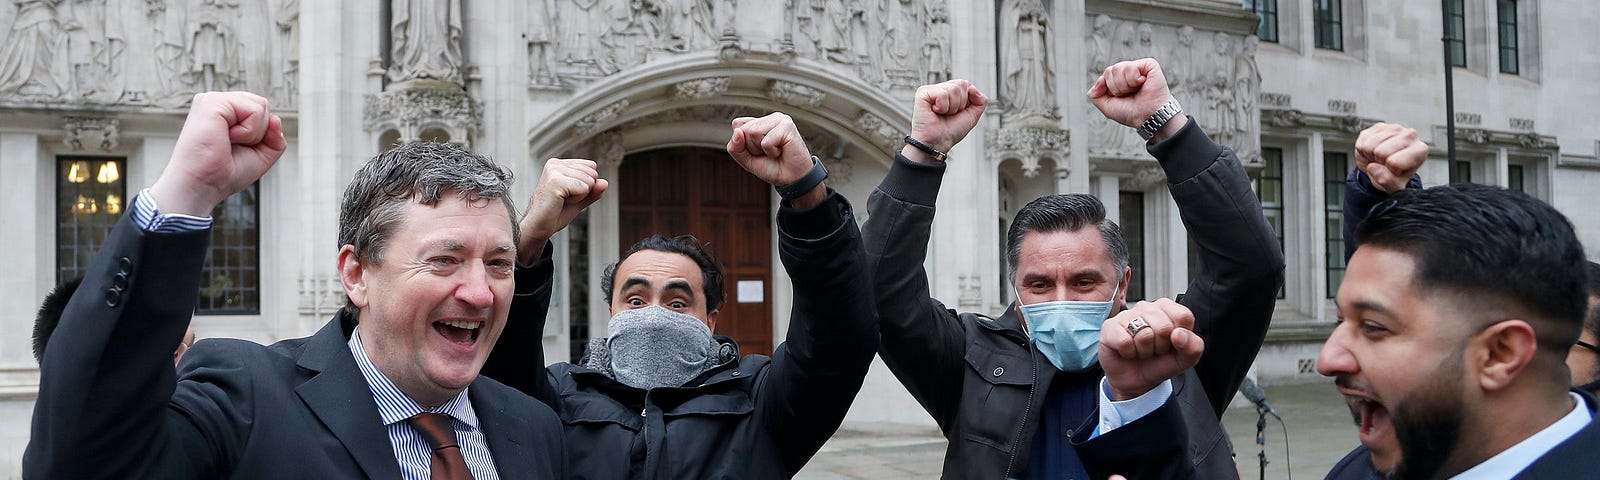 A group of men celebrating outside the London Supreme Court building